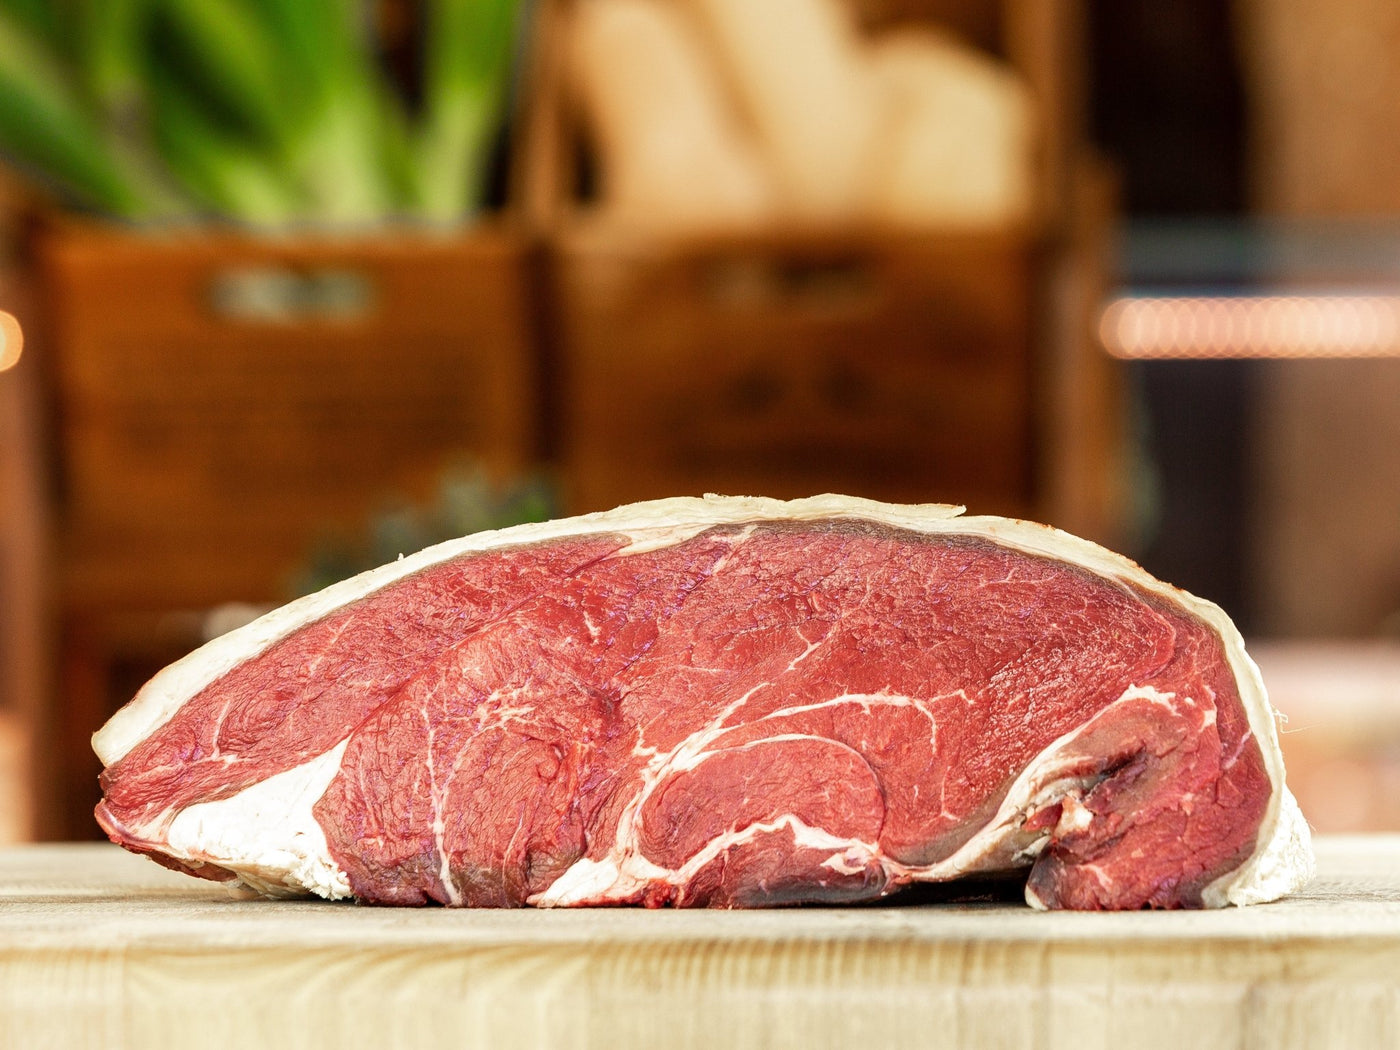 Grass Fed, Dry-Aged Rump Steak - Beef - Thomas Joseph Butchery - Ethical Dry-Aged Meat The Best Steak UK Thomas Joseph Butchery